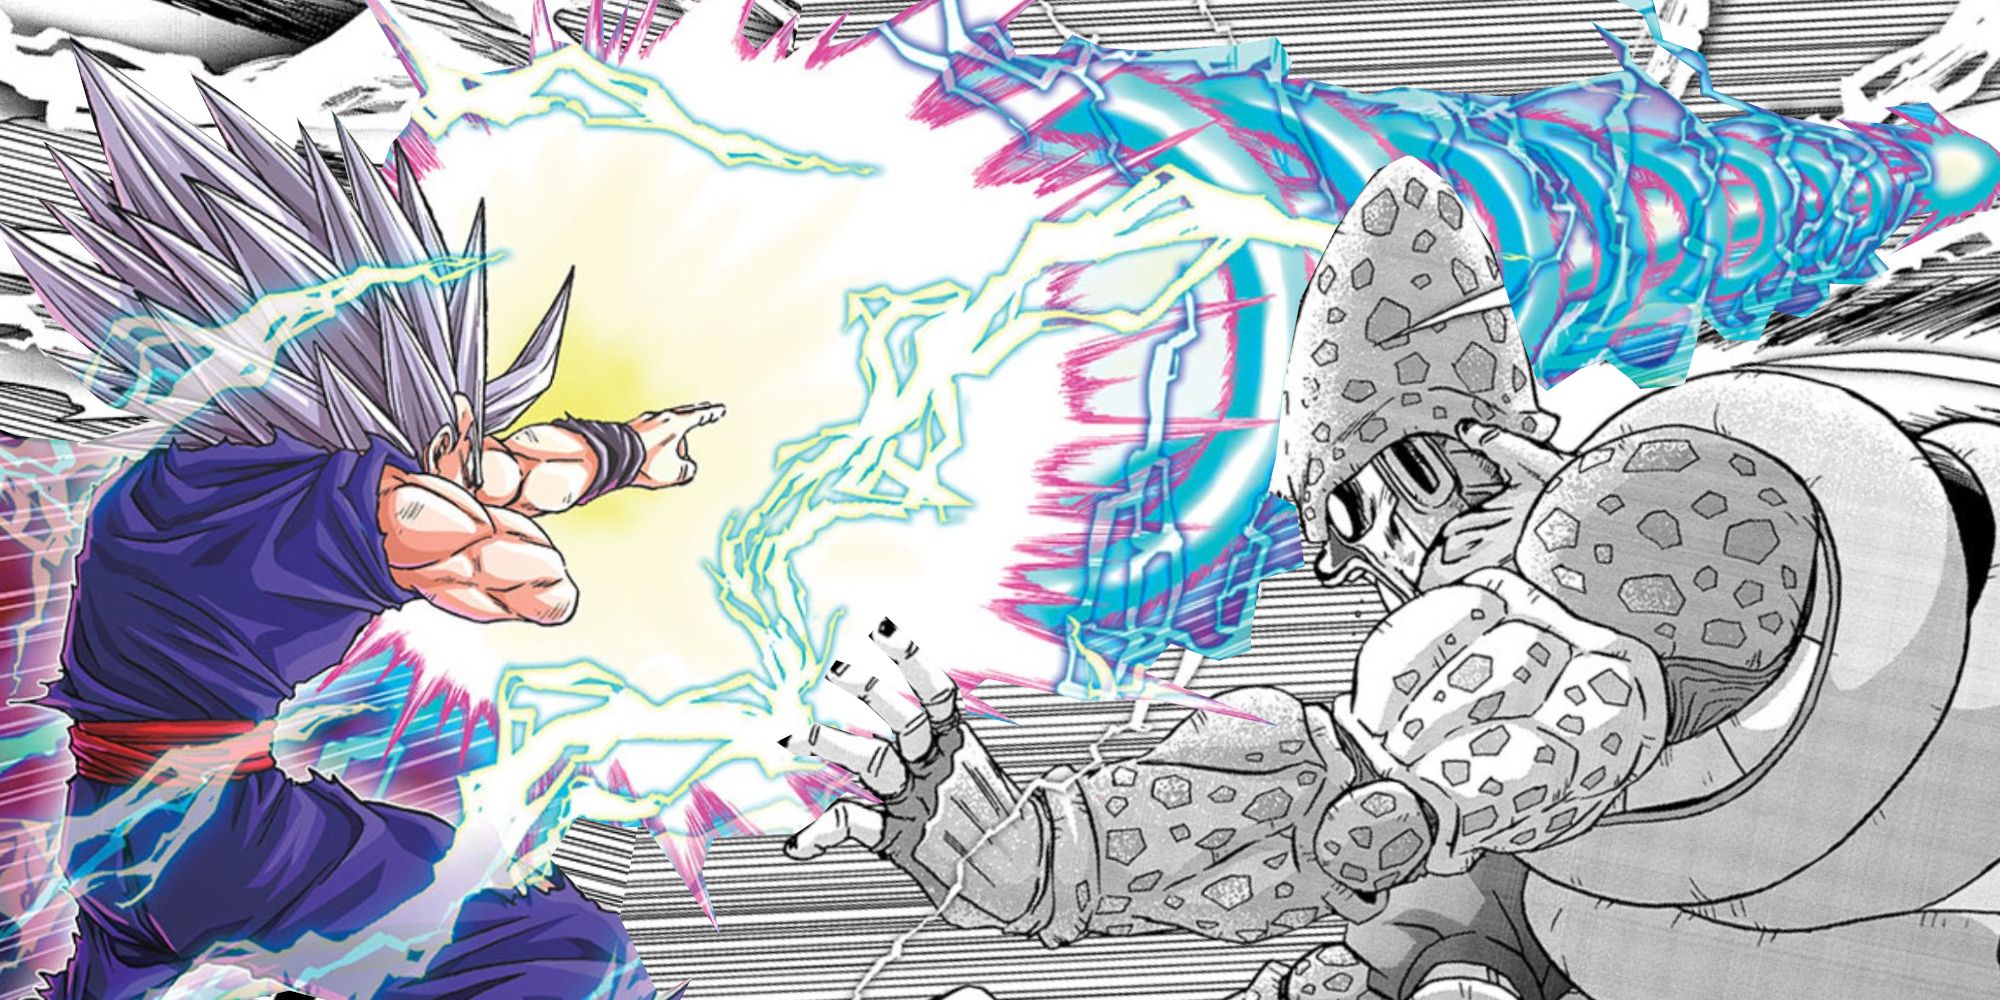 Image shows Dragon Ball Super manga versions of Beast Gohan in full color using Special beam cannon against a black and white Cell Max.